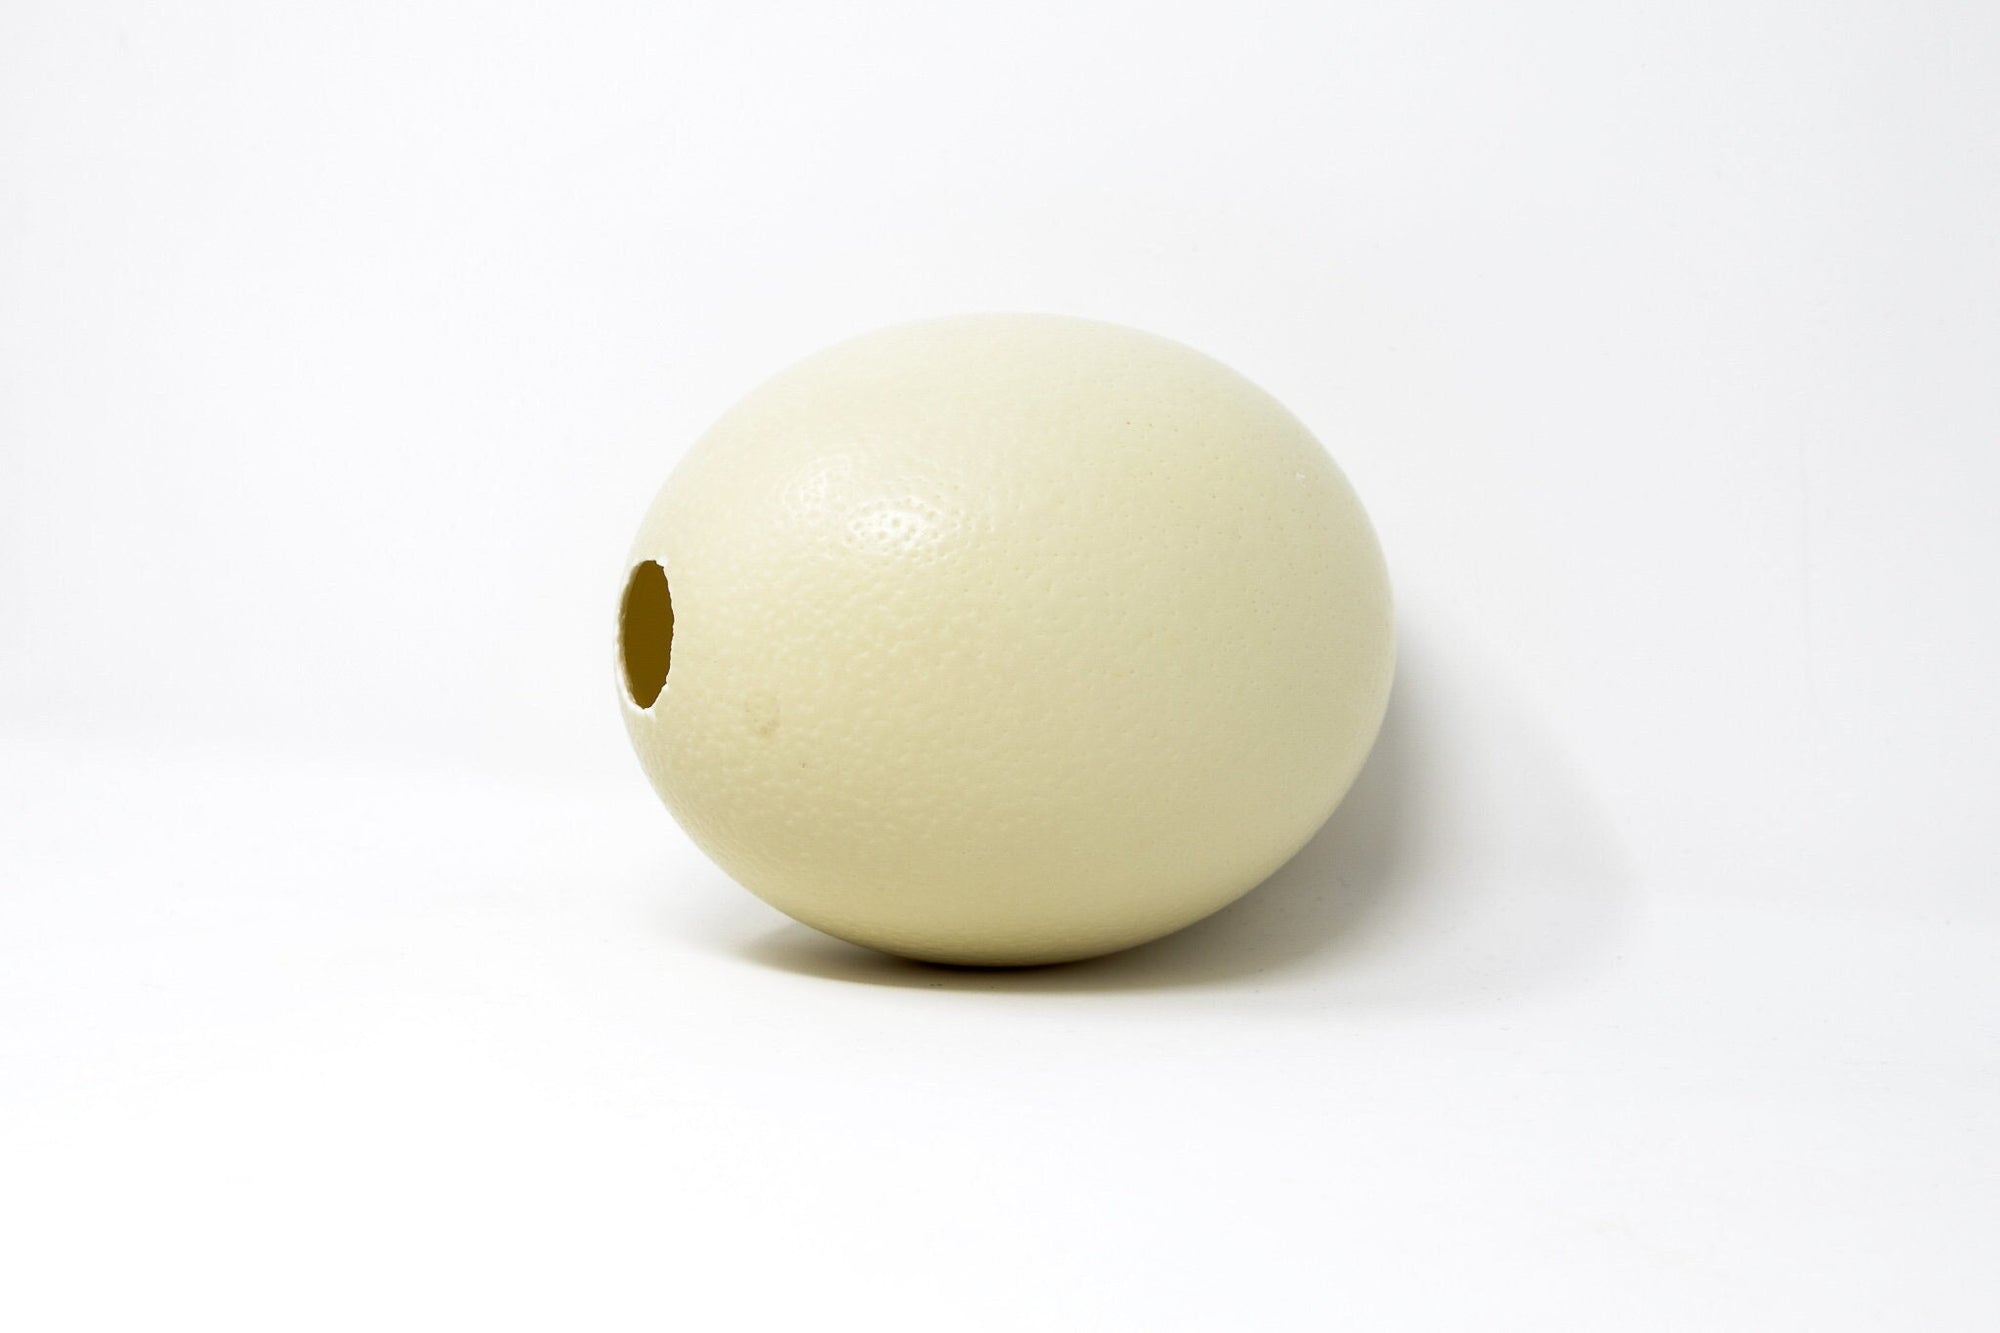 SIX (6) WHOLESALE Genuine South Africa Ostrich Egg XL, blown, Top-grade, Natural History Supplies